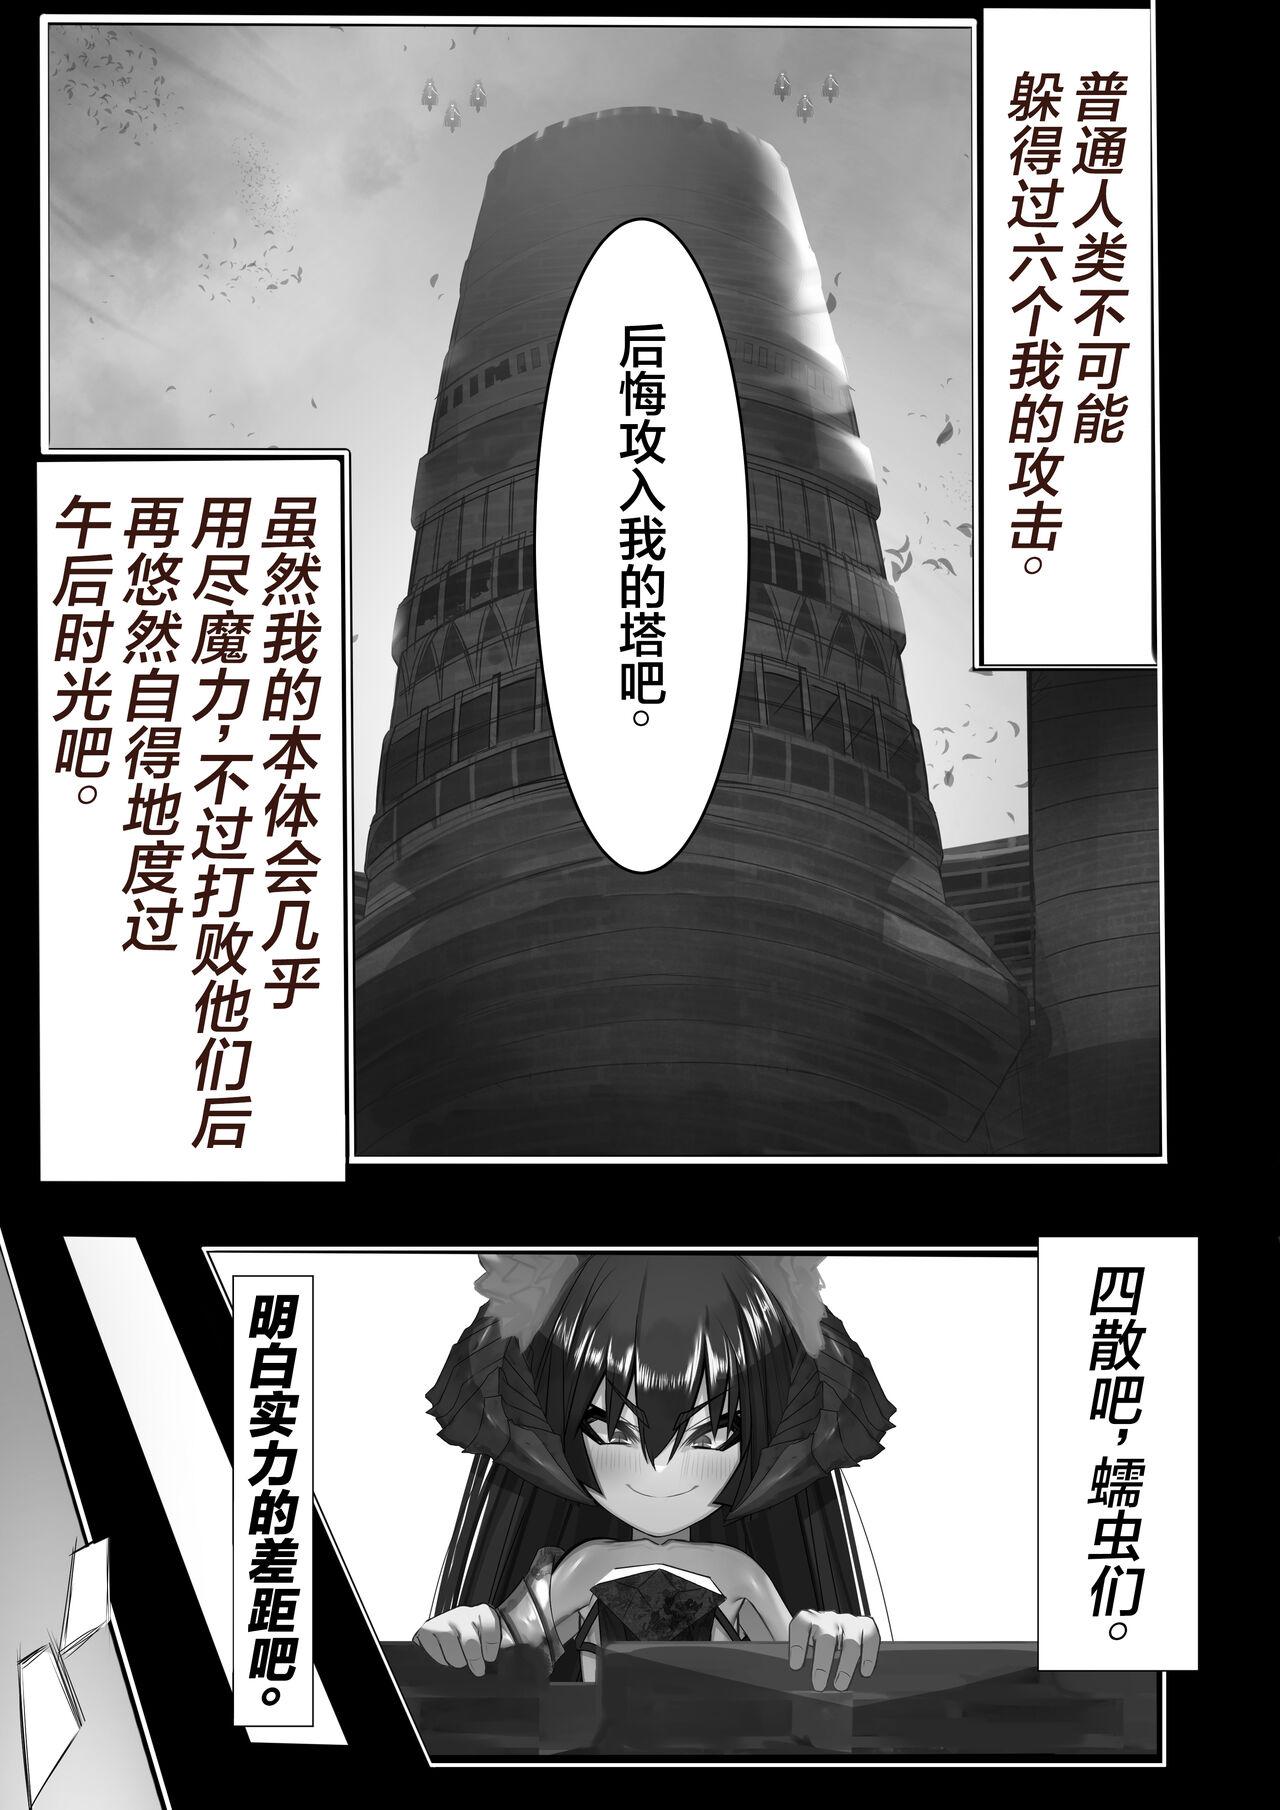 Foreplay 上位魔族・・なんだが？ Love - Page 6